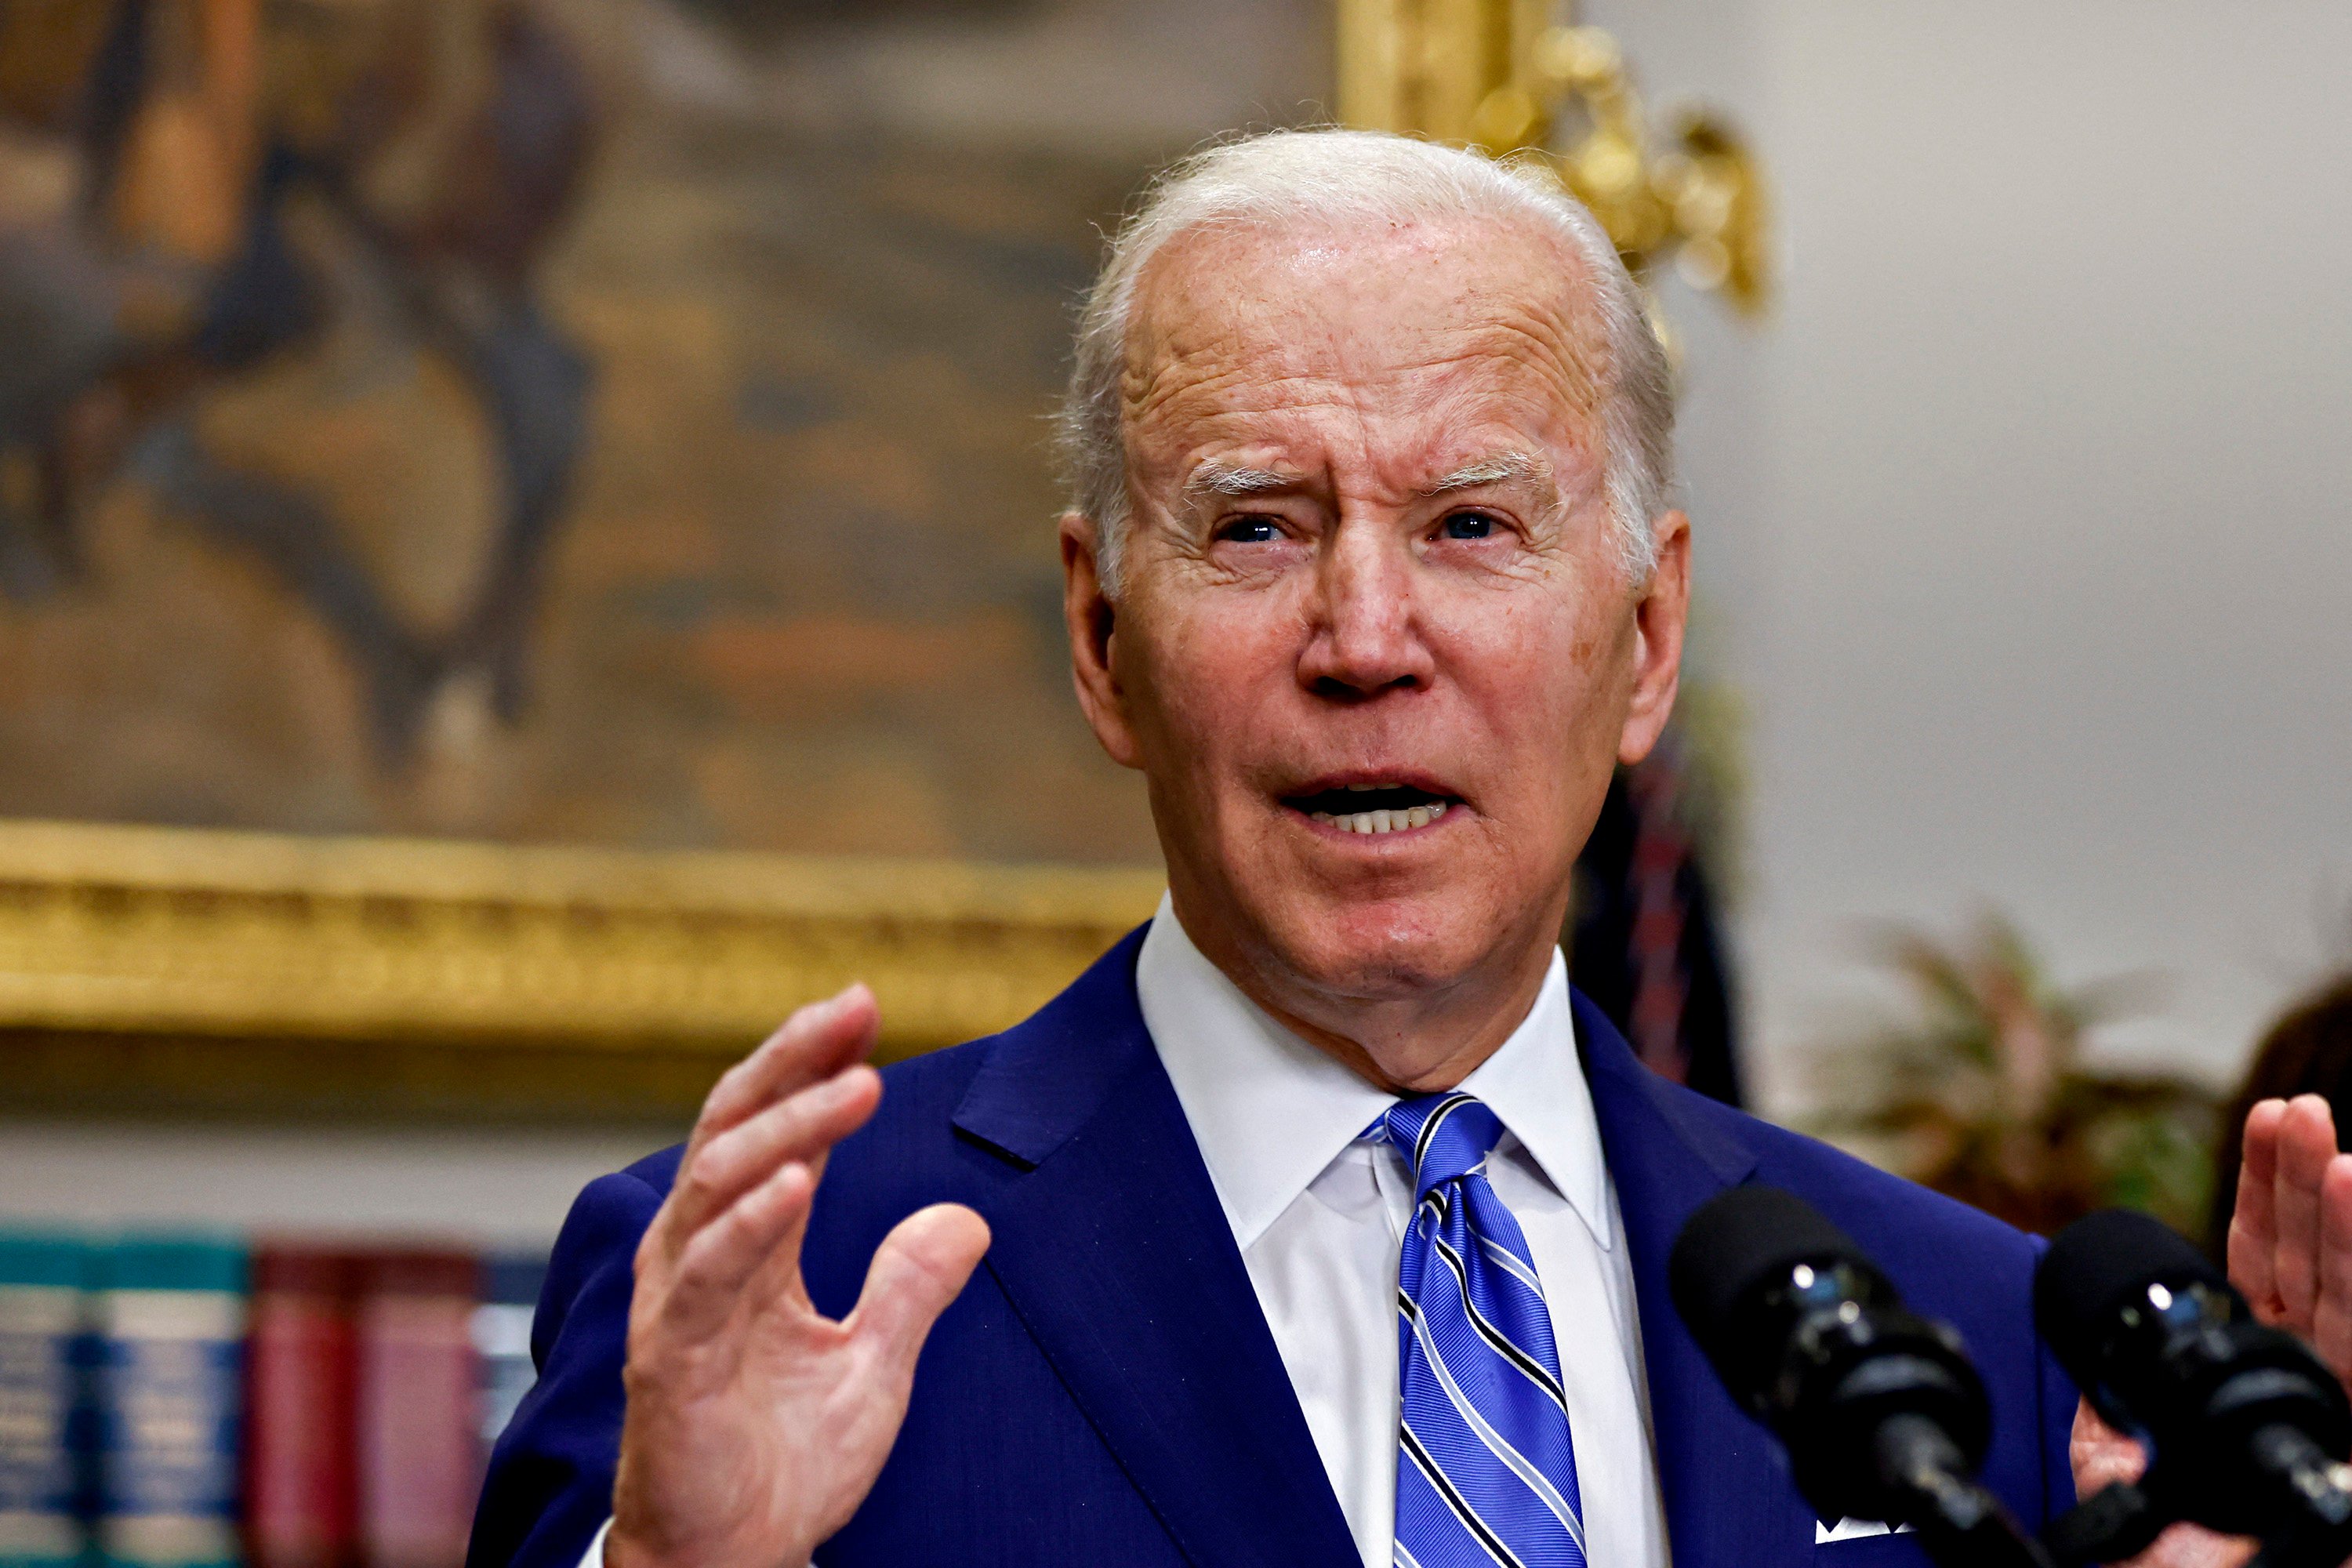 US President Joe Biden has focused on countering China in the Indo-Pacific, but a new report suggests the strategy should be rethought. Photo: Abaca Press/TNS